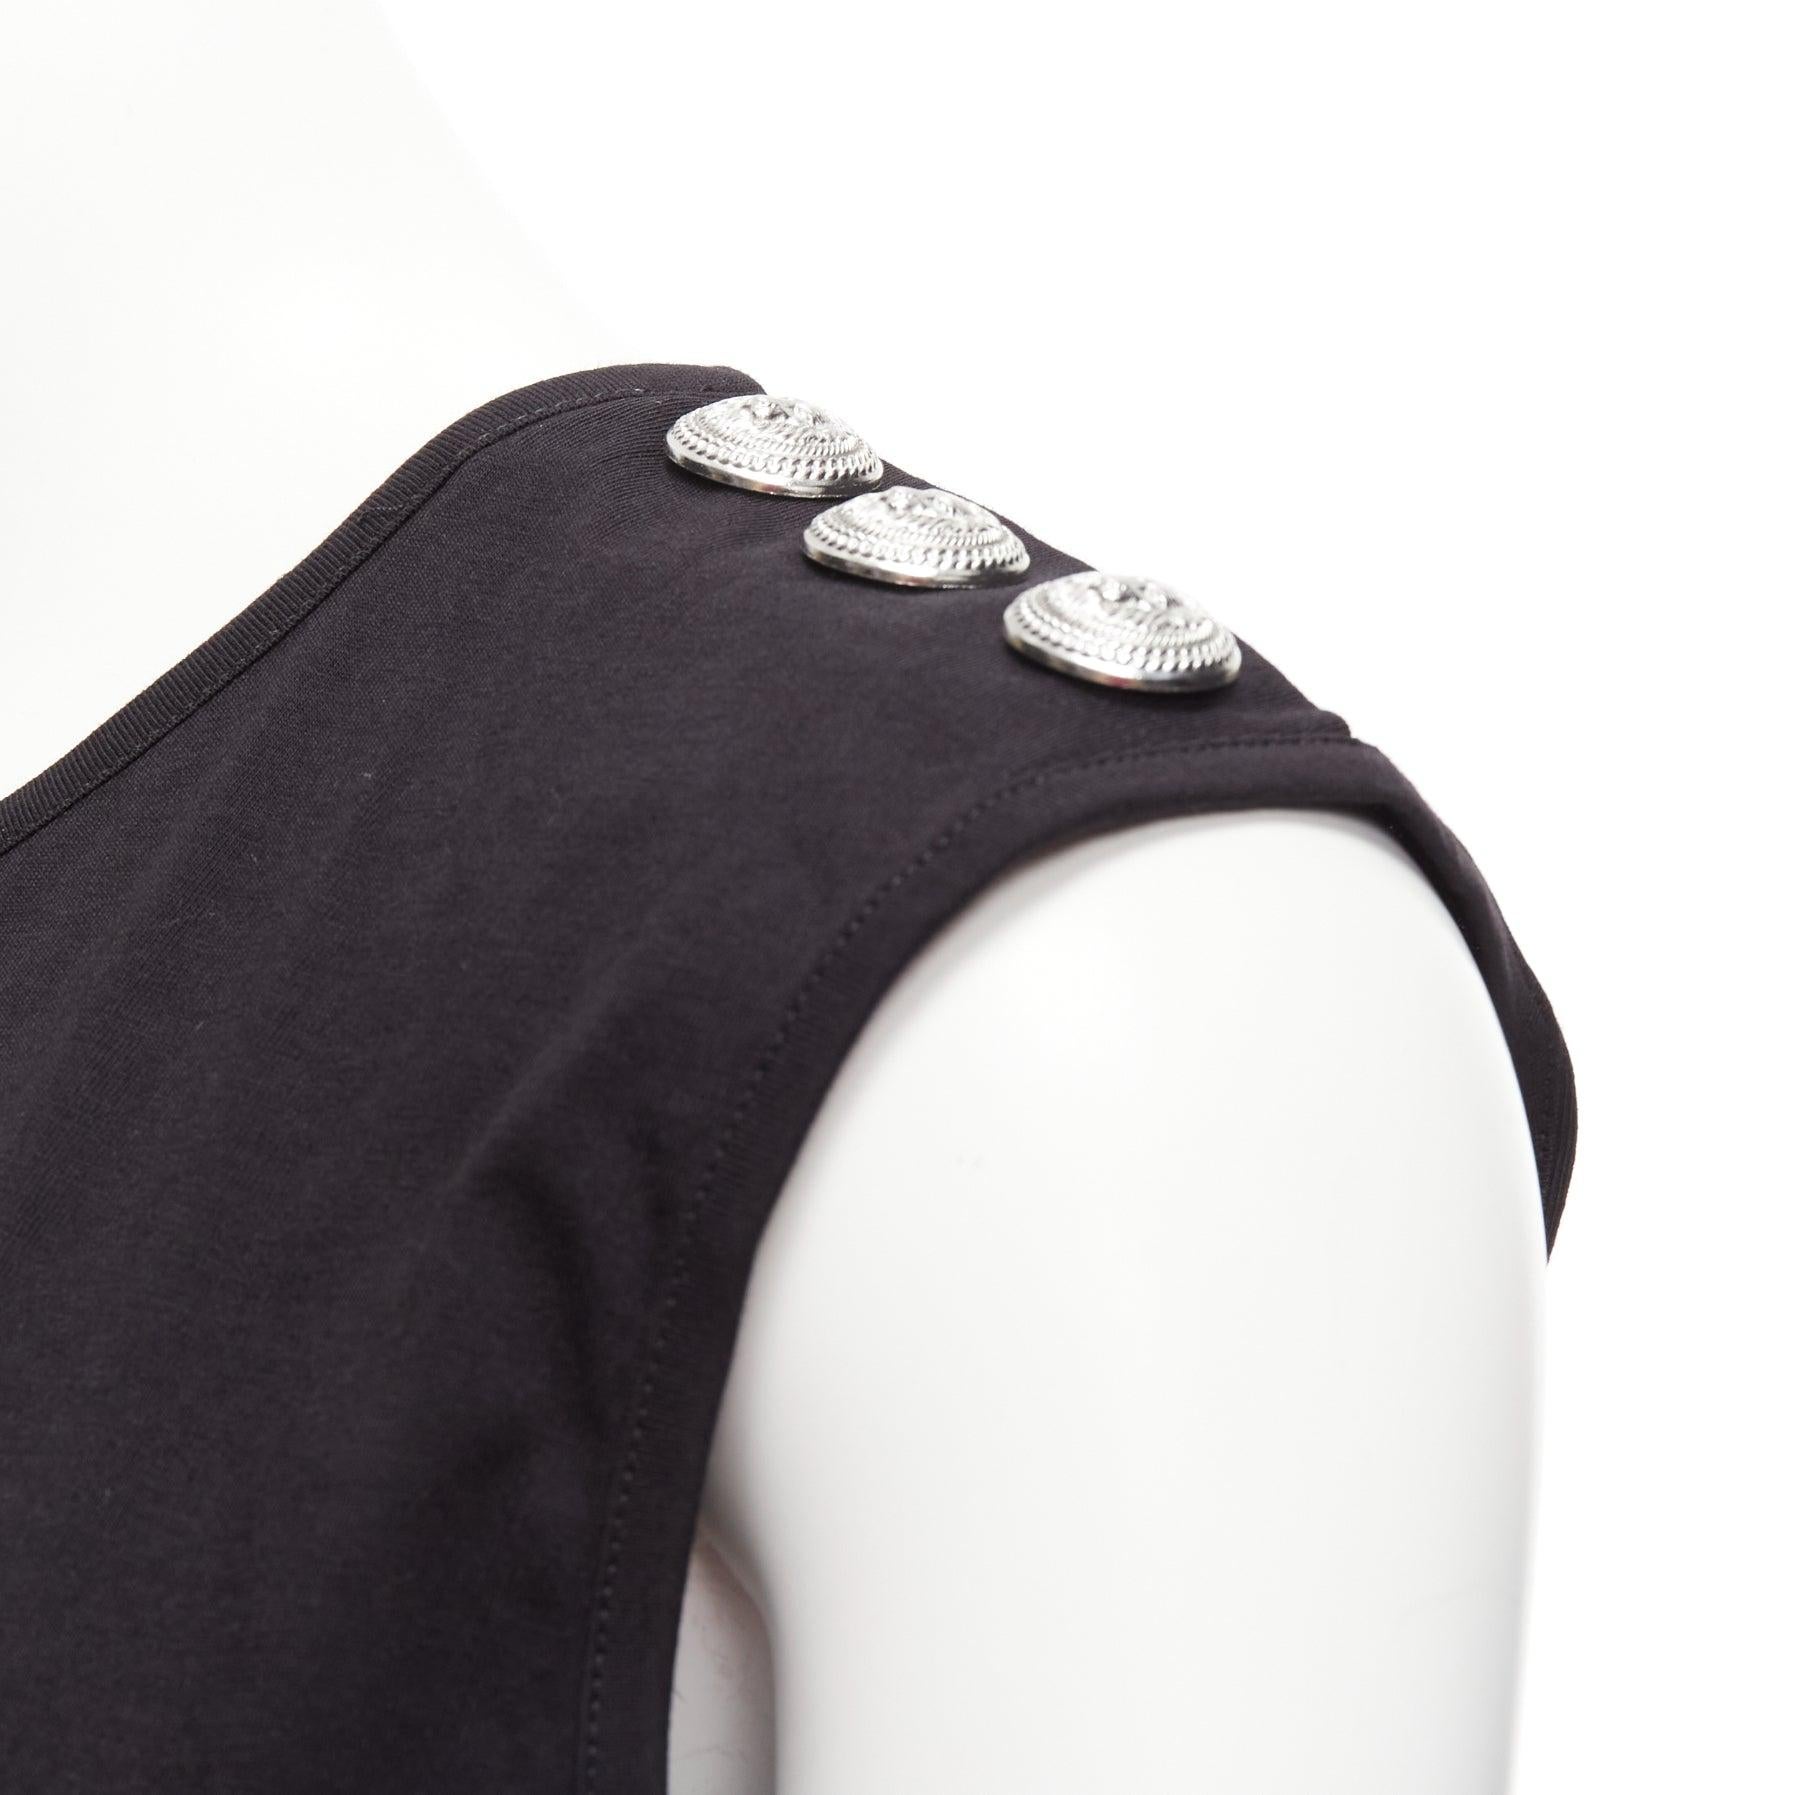 BALMAIN black cotton crest logo silver button shoulder tank top vest FR34 XS
Reference: AAWC/A01115
Brand: Balmain
Designer: Olivier Rousteing
Material: Cotton
Color: Black, White
Pattern: Solid
Closure: Pullover
Extra Details: Silver button